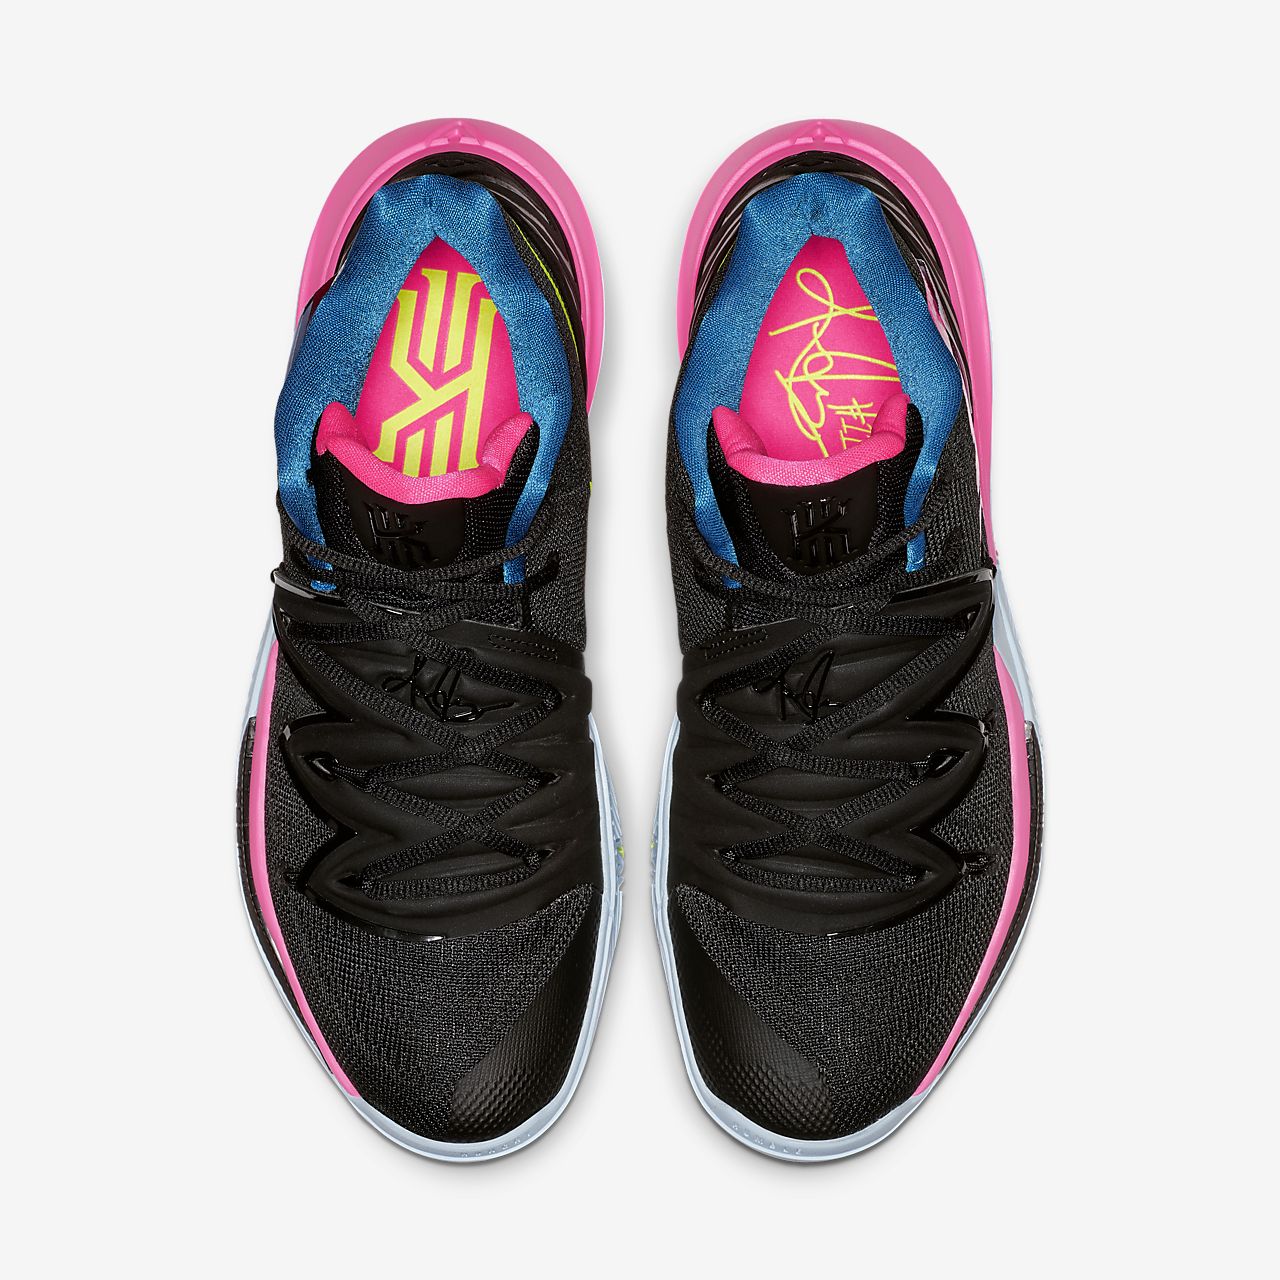 kyrie 5 youth 3f1a19